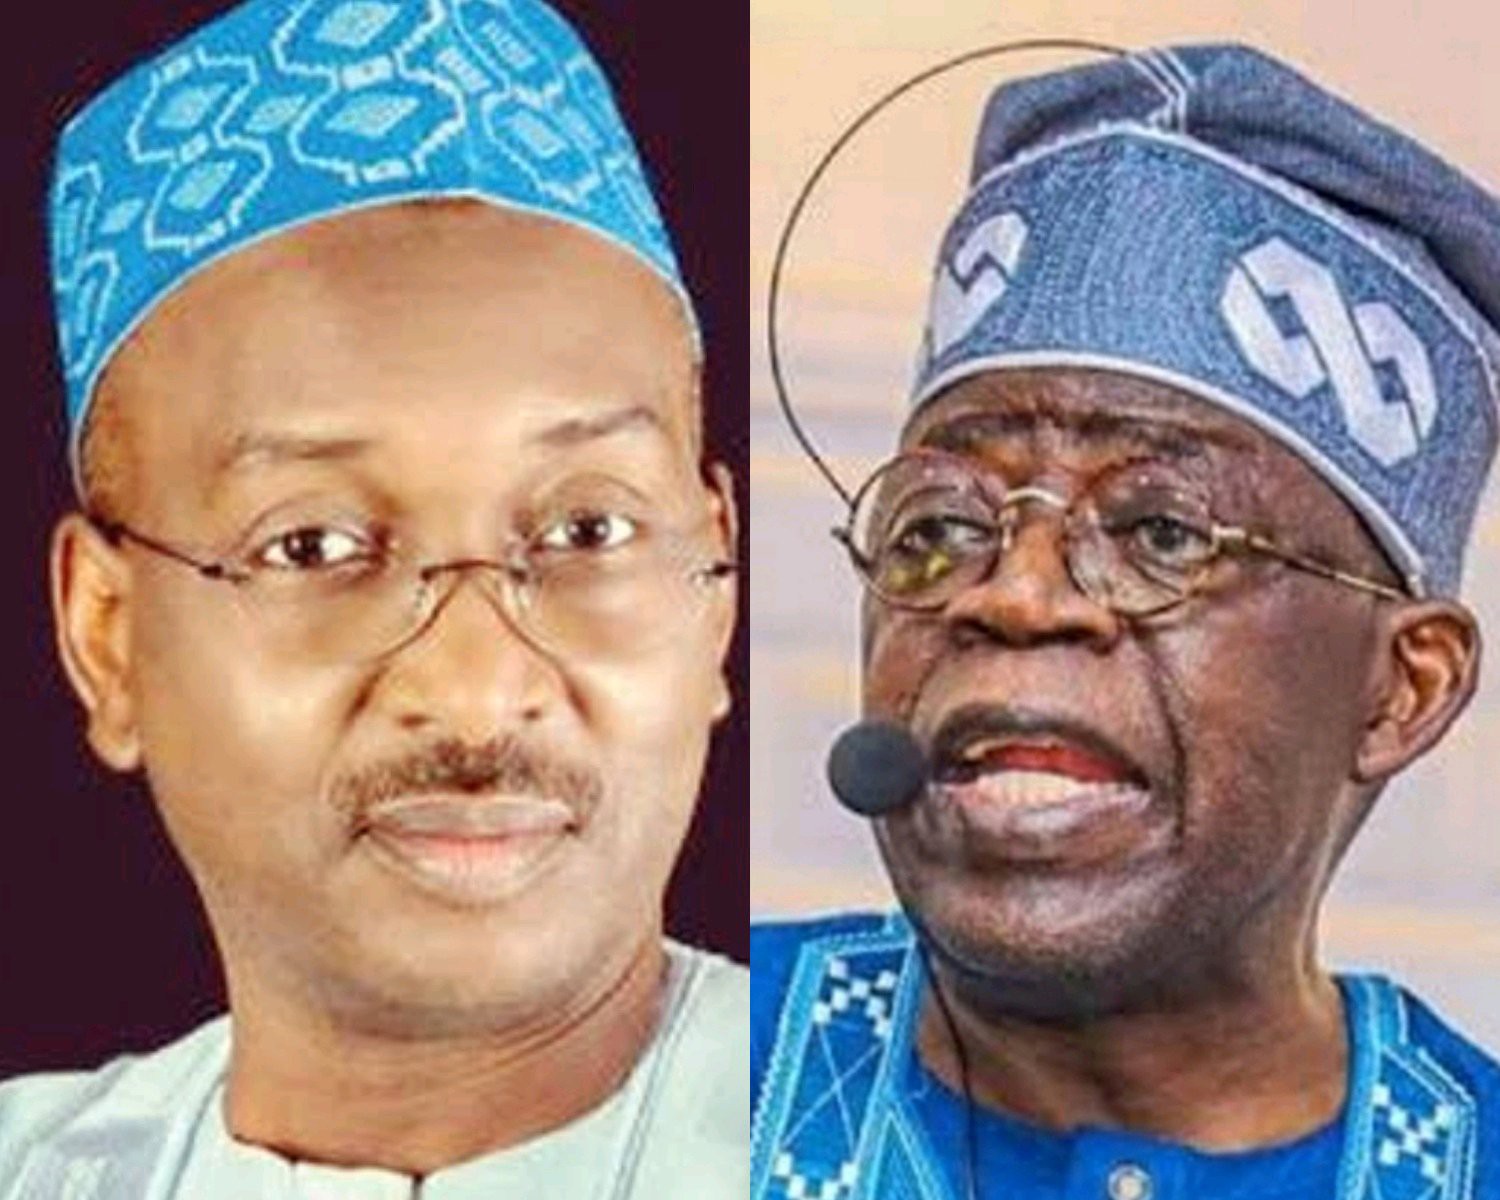 According to Salihu Lukman, President Tinubu almost single-handedly funded his campaign which is what earned him the authority he has now in APC